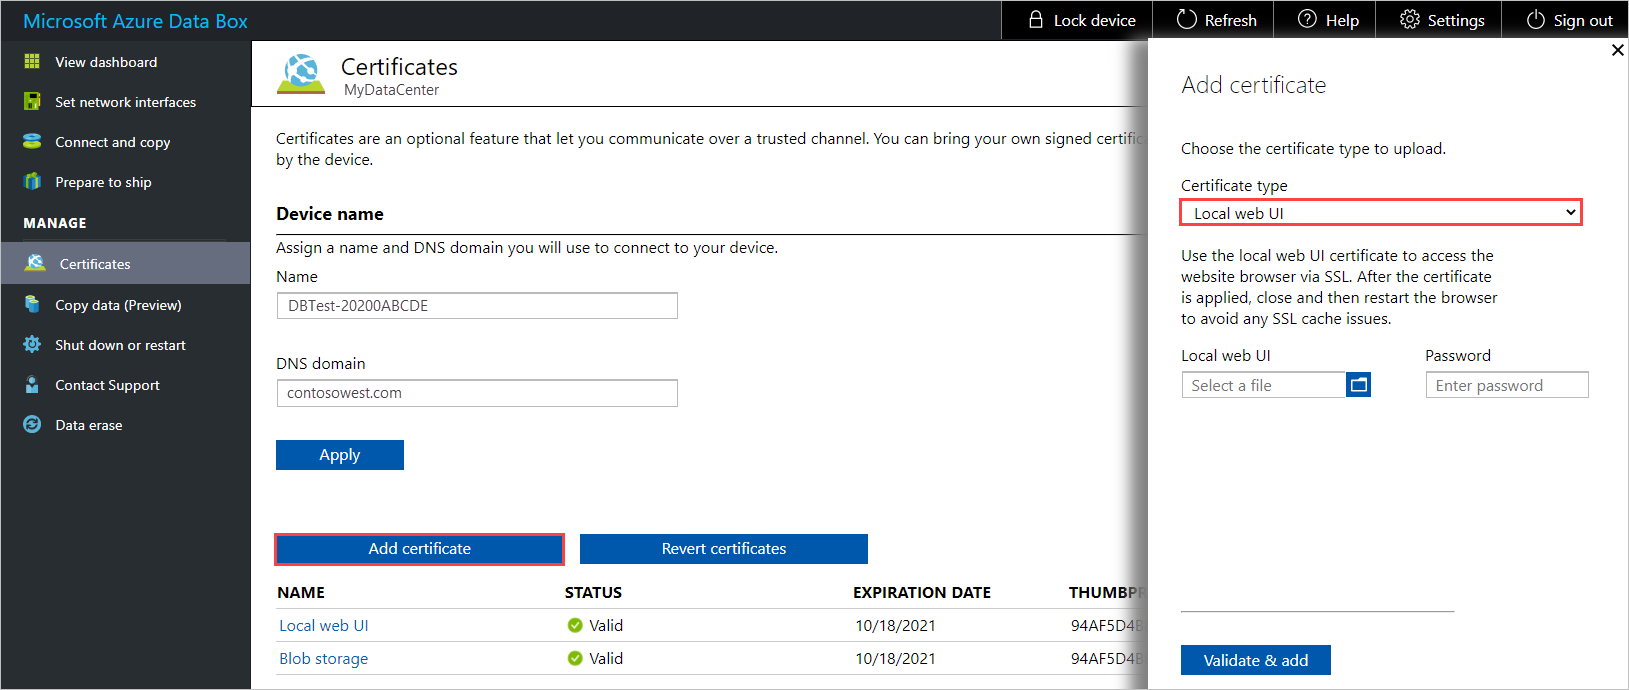 Add certificates panel on the Certificates page for a Data Box device